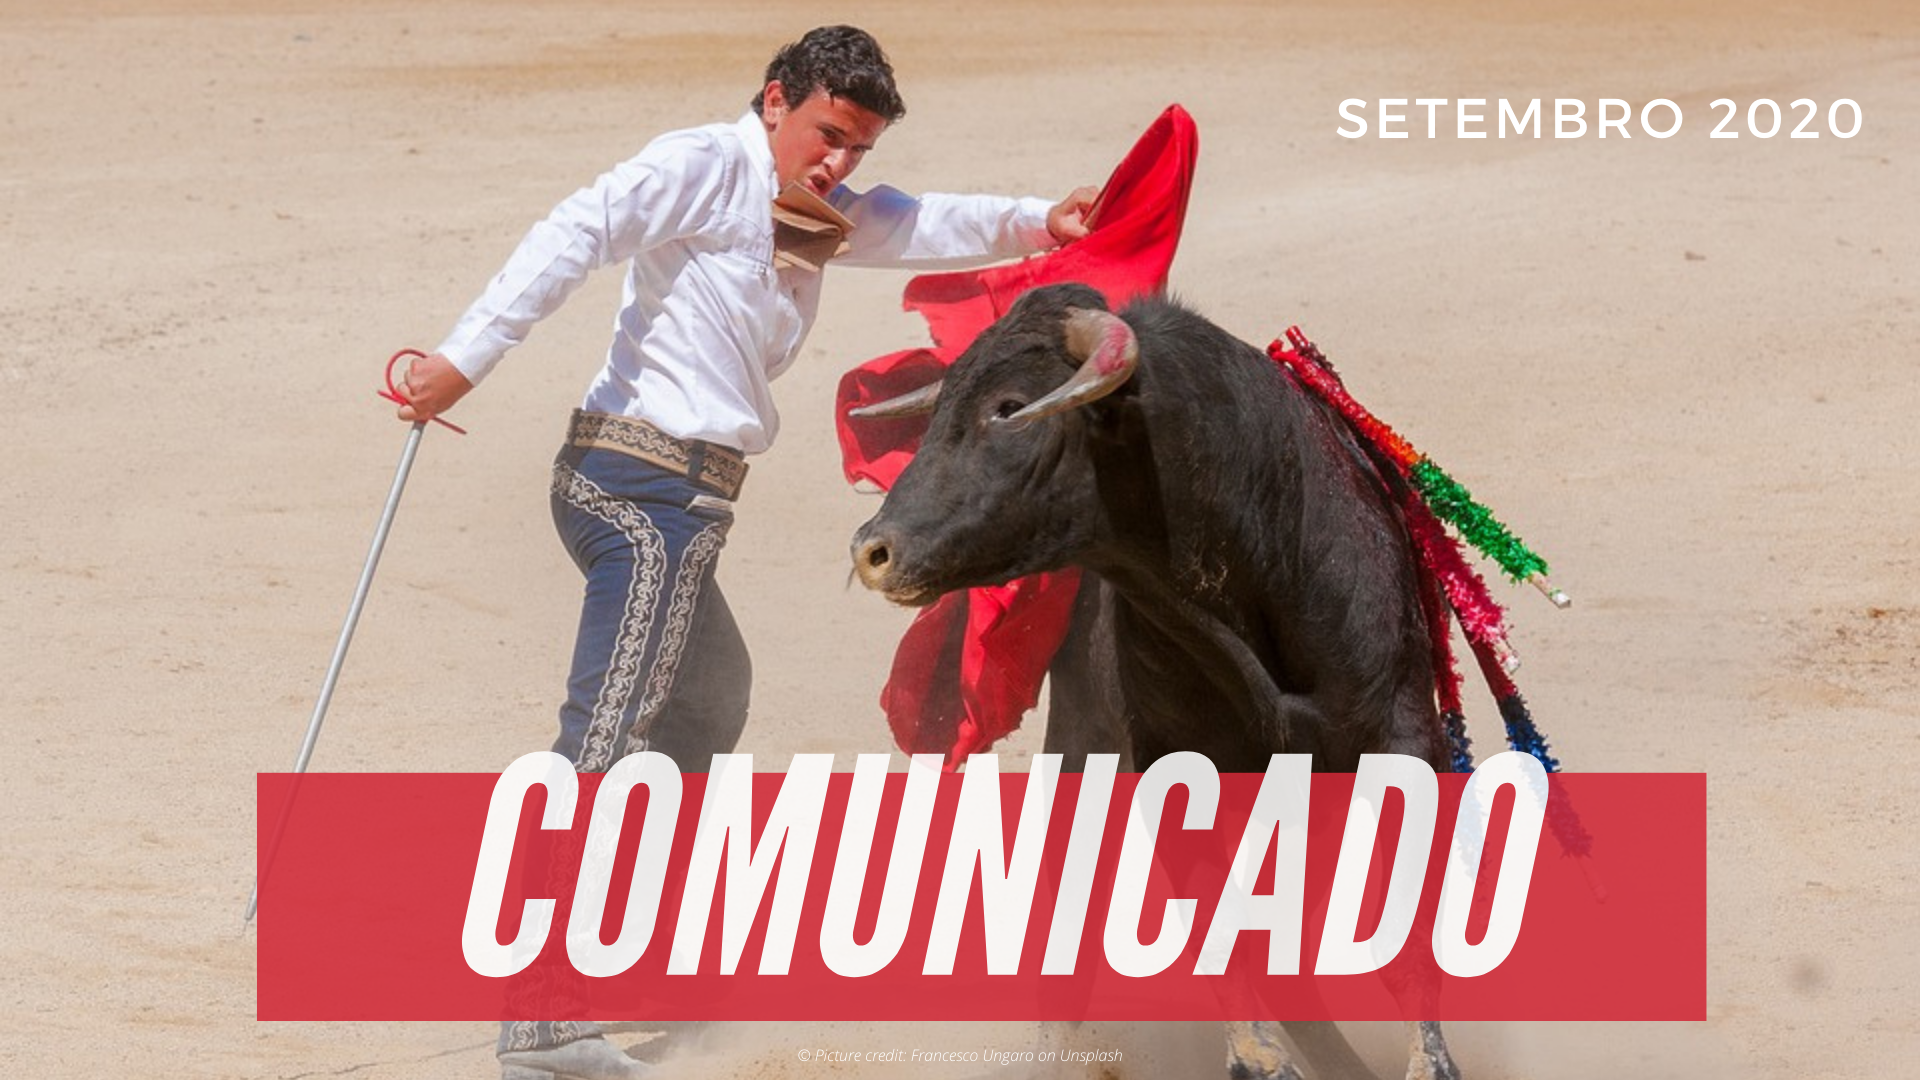 Francisco Guerreiro gathers European political families to reject bullfighting as Cultural Heritage